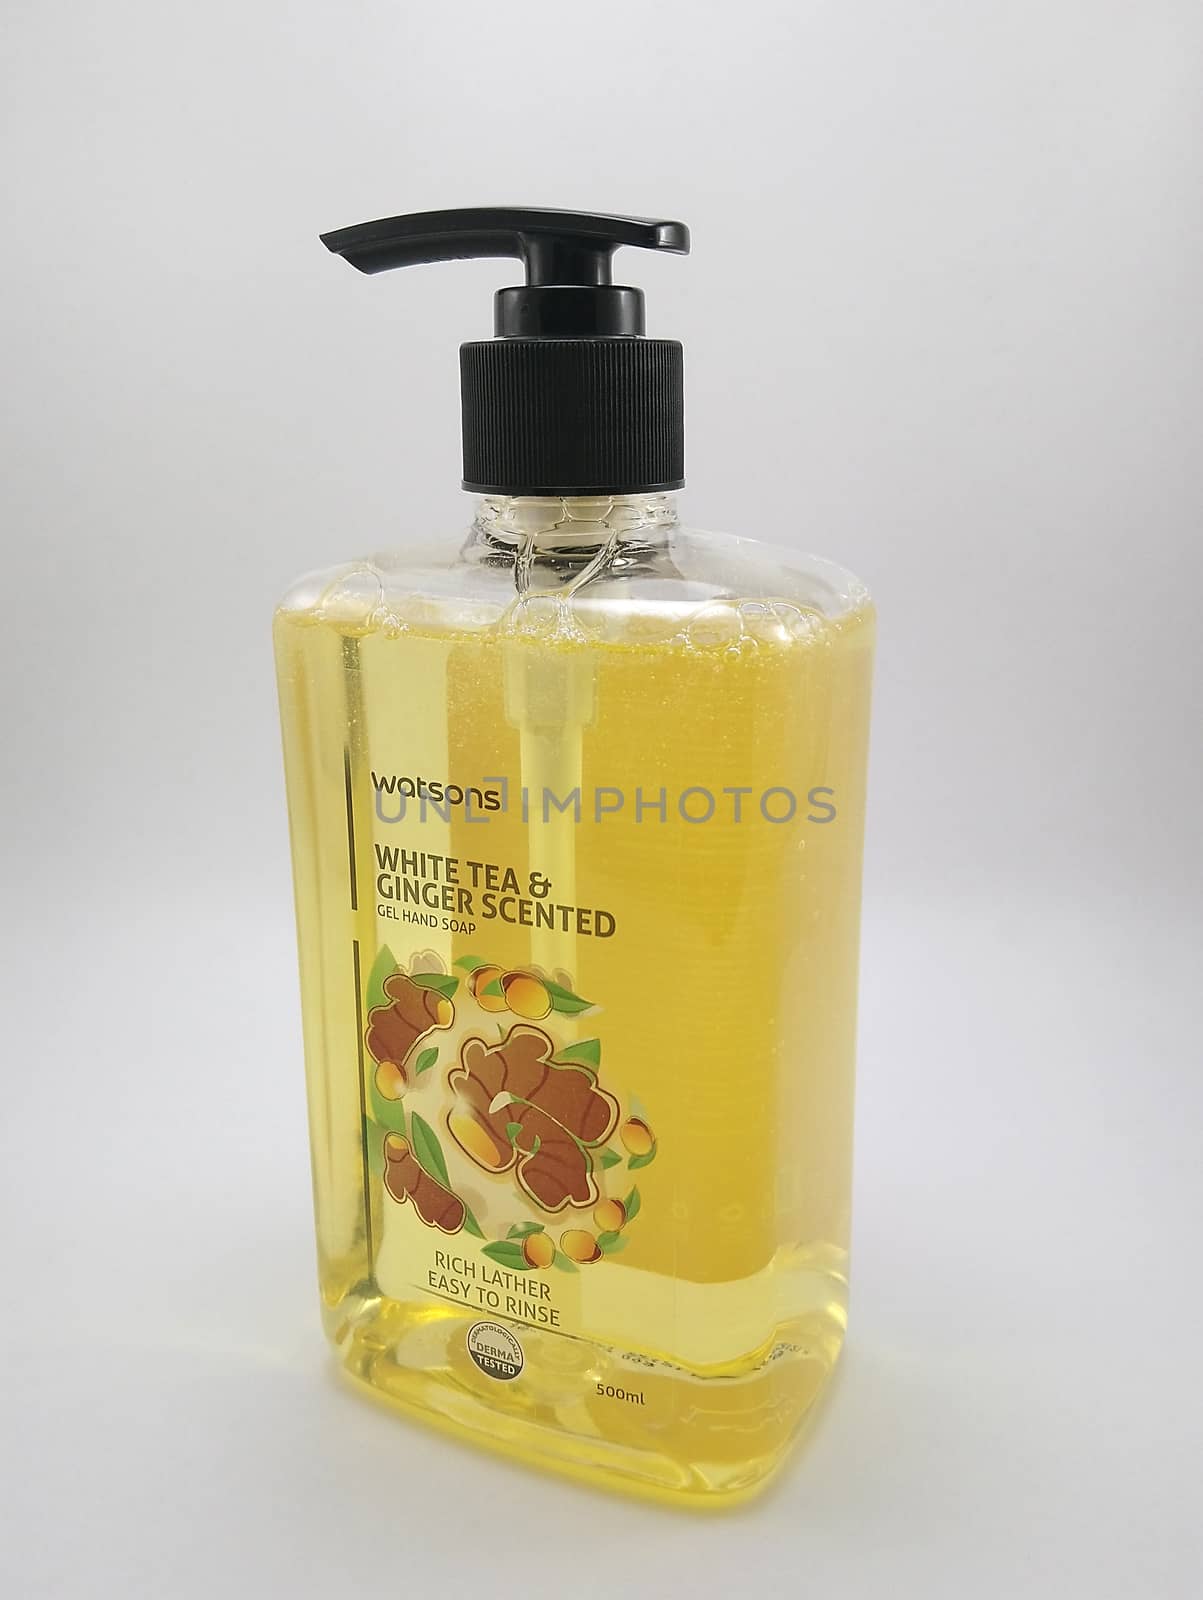 Watsons white tea and ginger scented gel liquid hand soap in Man by imwaltersy